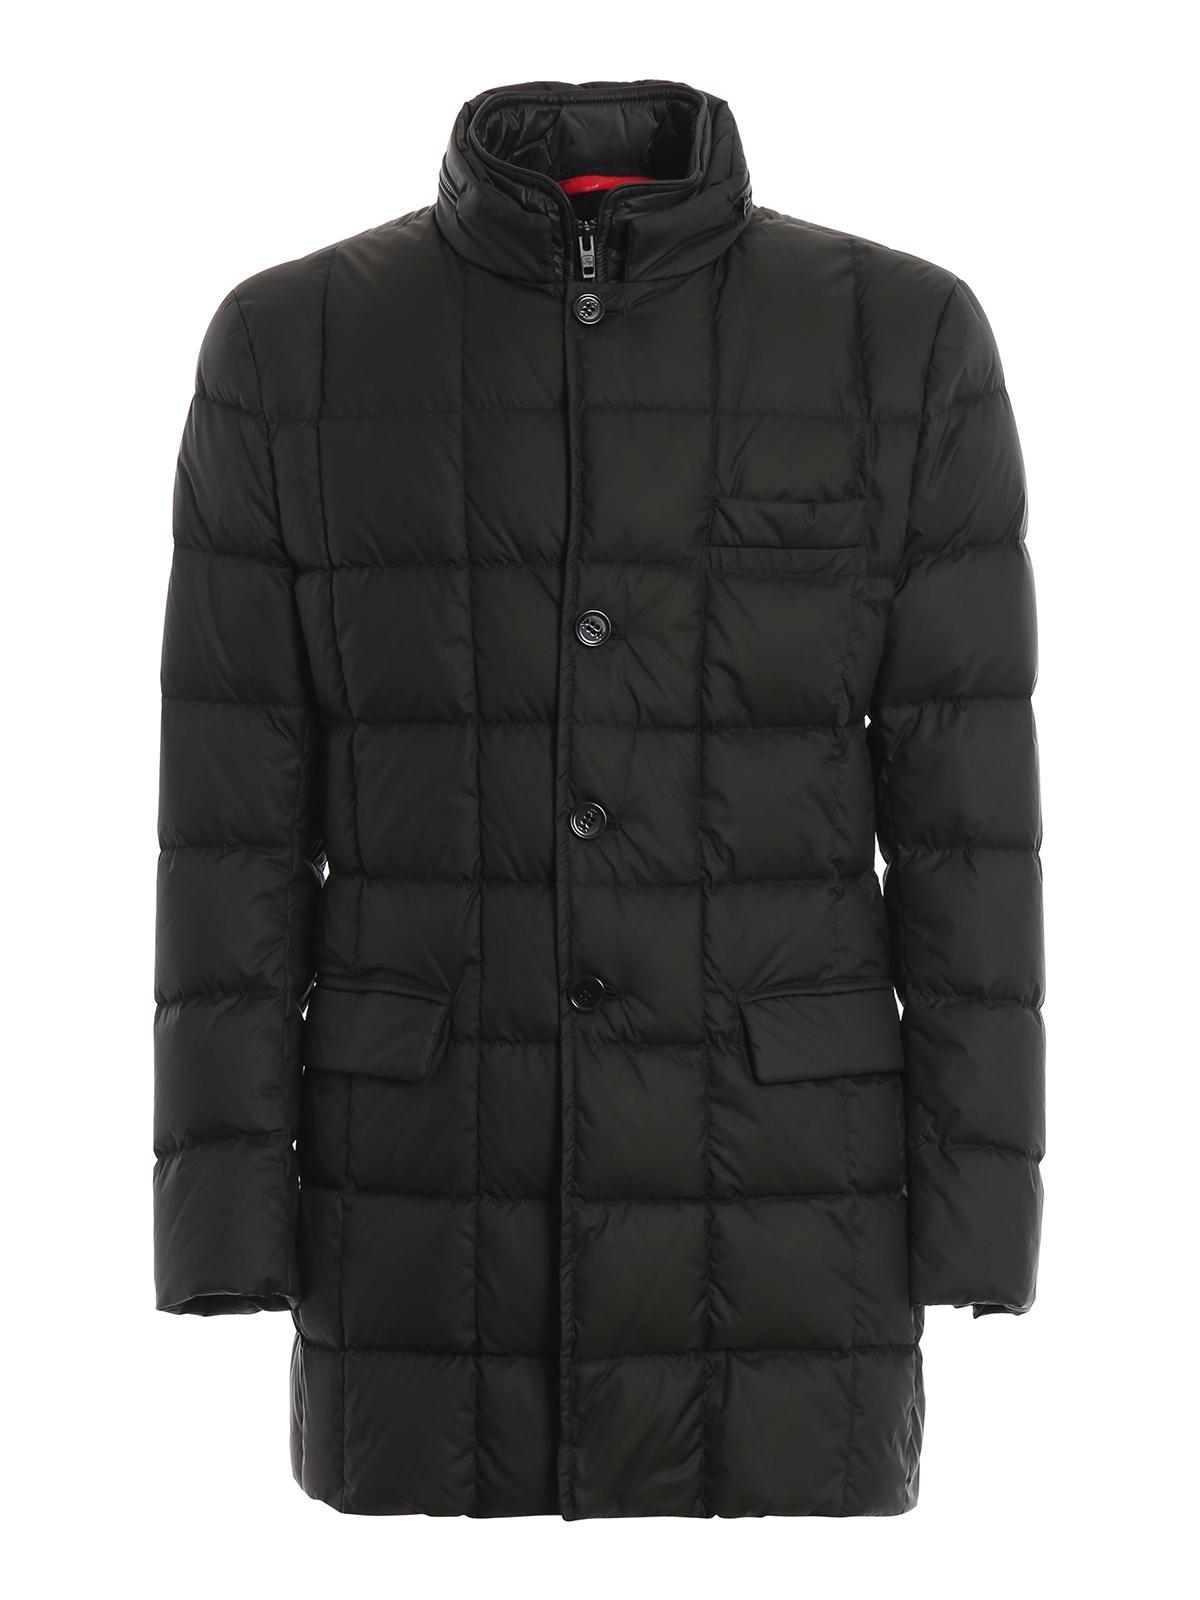 Fay Check Quilted Padded Long Coat in Black for Men - Lyst